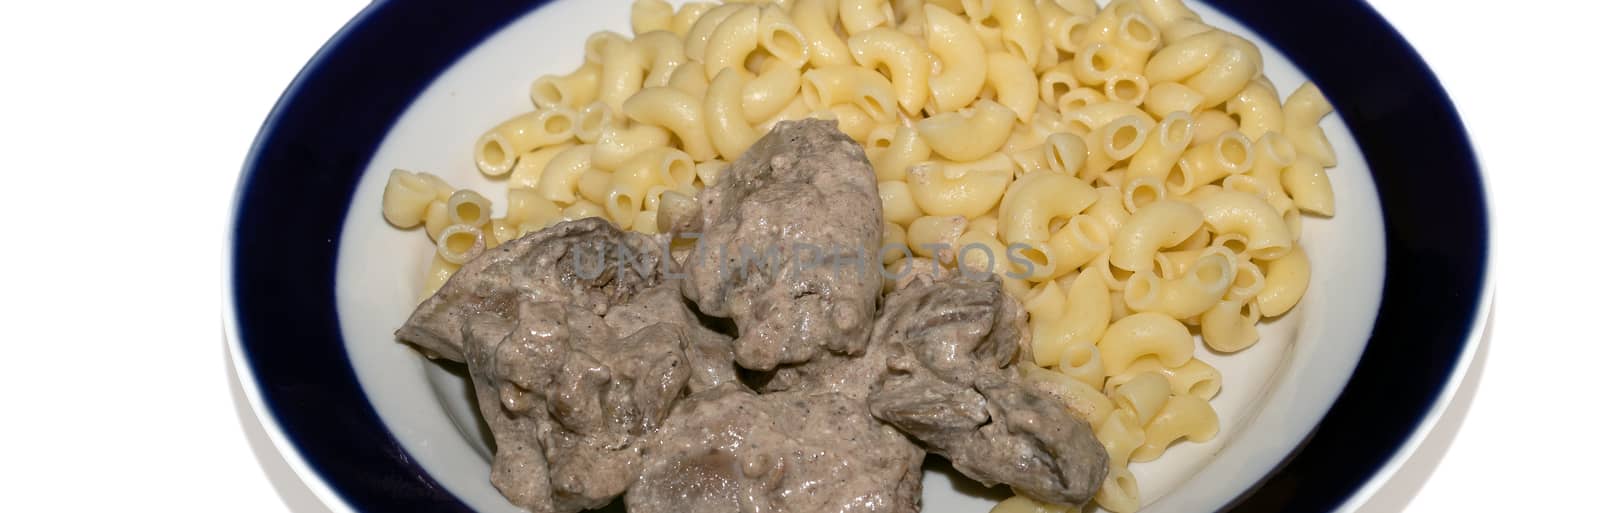 Chicken liver and pasta dish in a bowl by bonilook